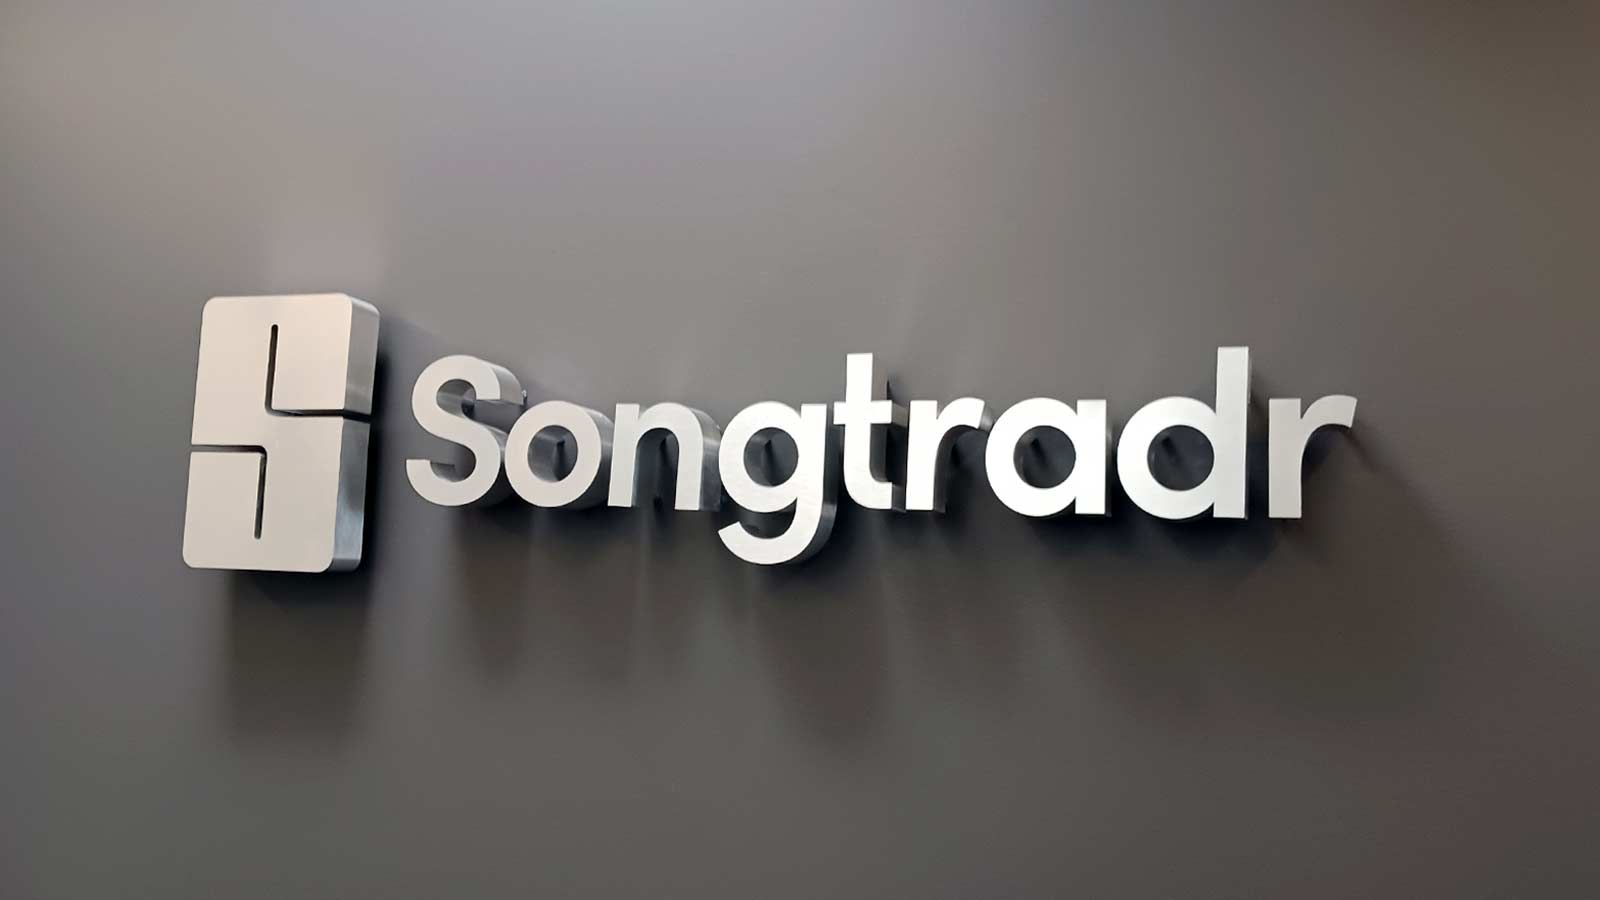 Songtradr Inc reverse channel letters attached to the wall